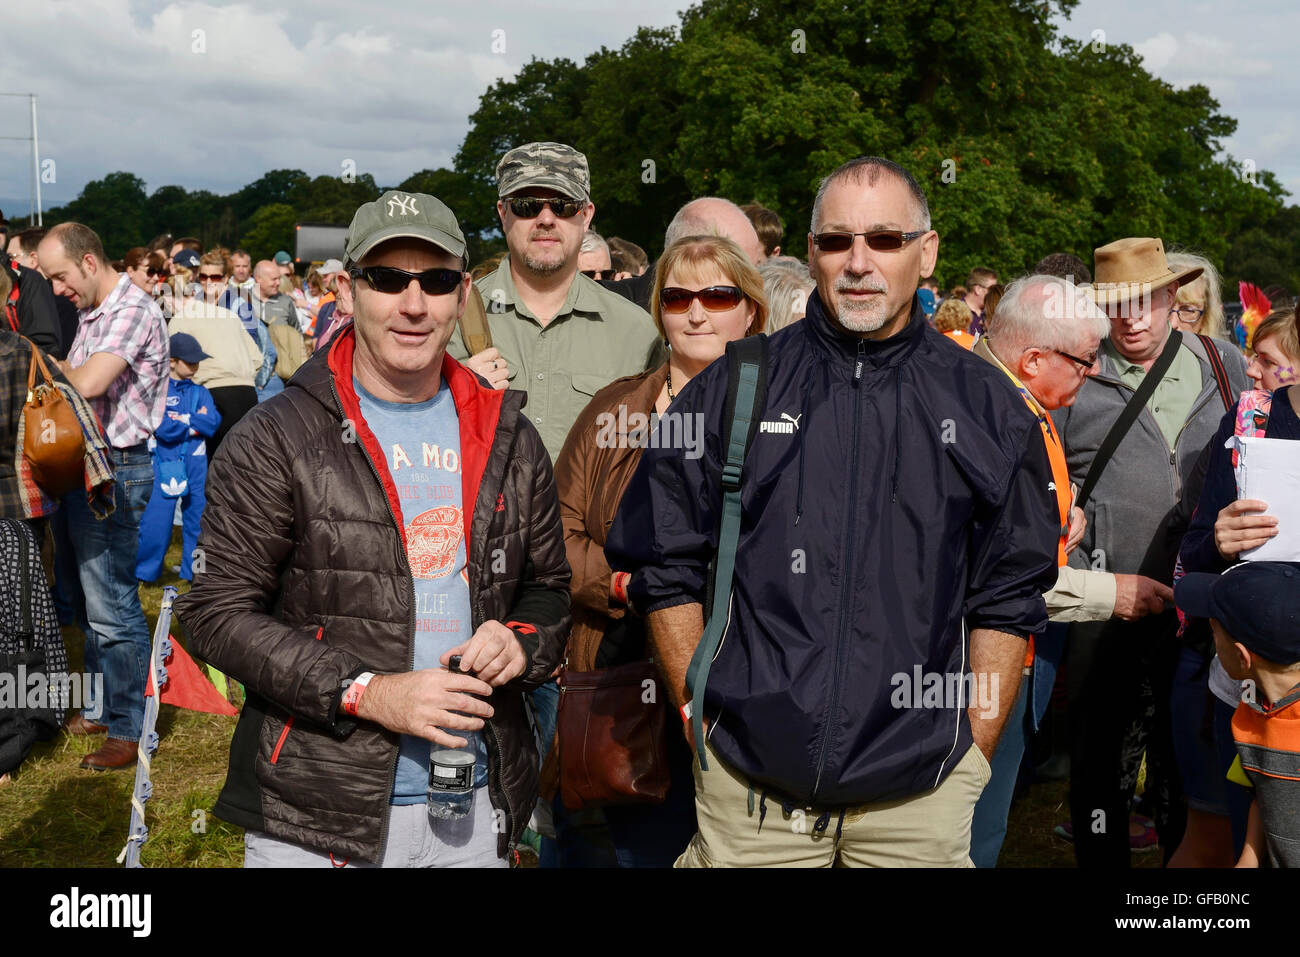 Carfest North, Bolesworth, Cheshire, UK. 31st July 2016. At the front of the queue to enter the event. The event is the brainchild of Chris Evans and features 3 days of cars, music and entertainment with profits being donated to the charity Children in Need. Andrew Paterson/Alamy Live News Stock Photo